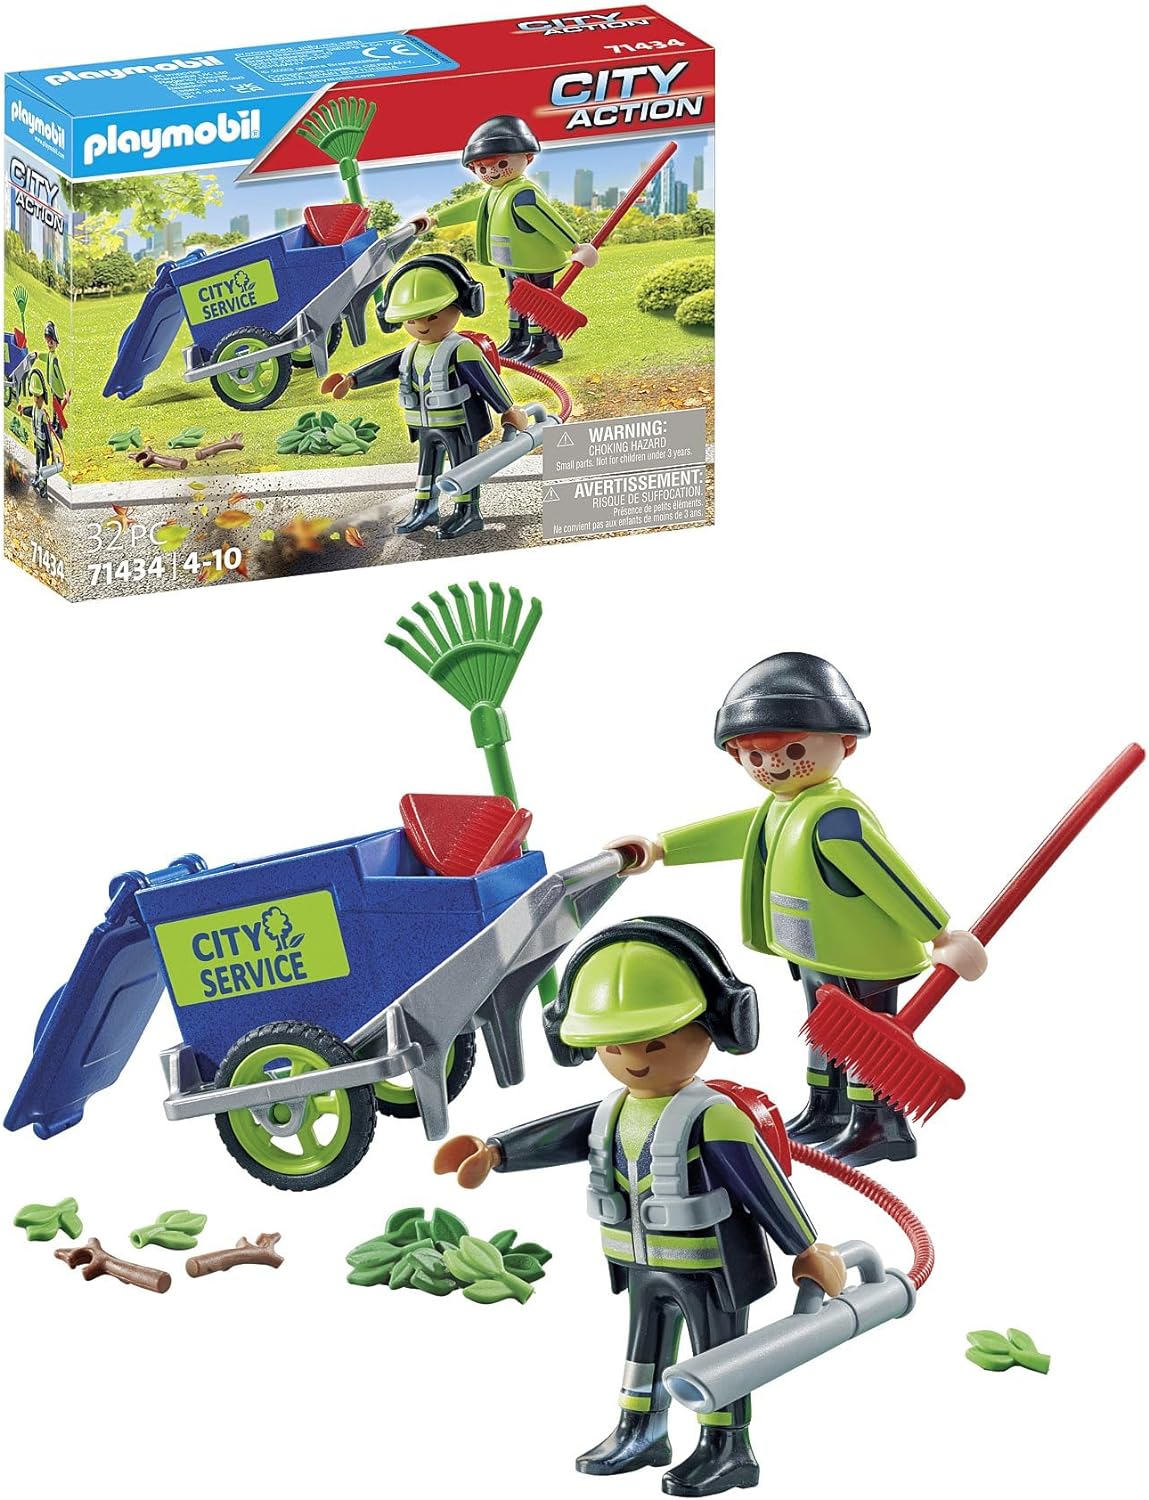 PLAYMOBIL City cleaning with electric vehicle